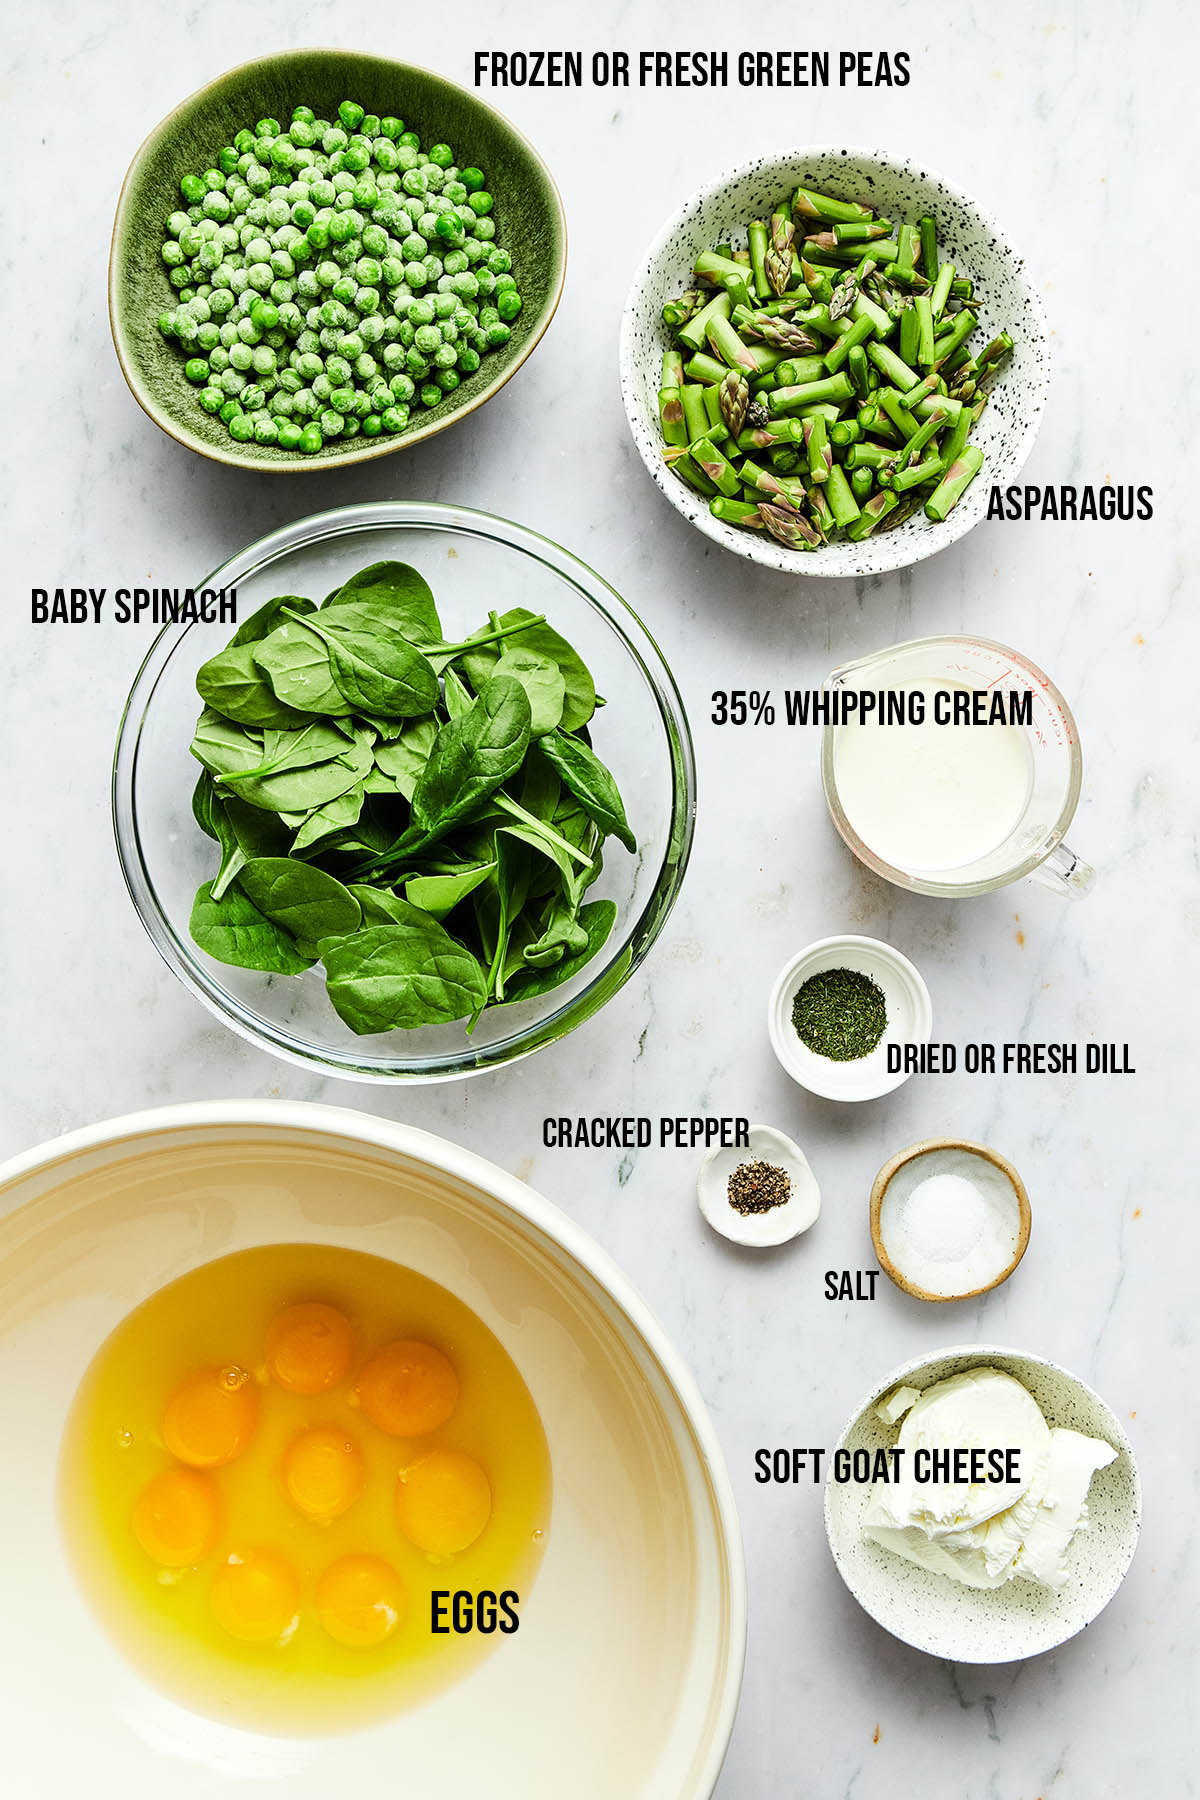 Ingredients to make baked asparagus frittata with peas, spinach, & goat cheese.